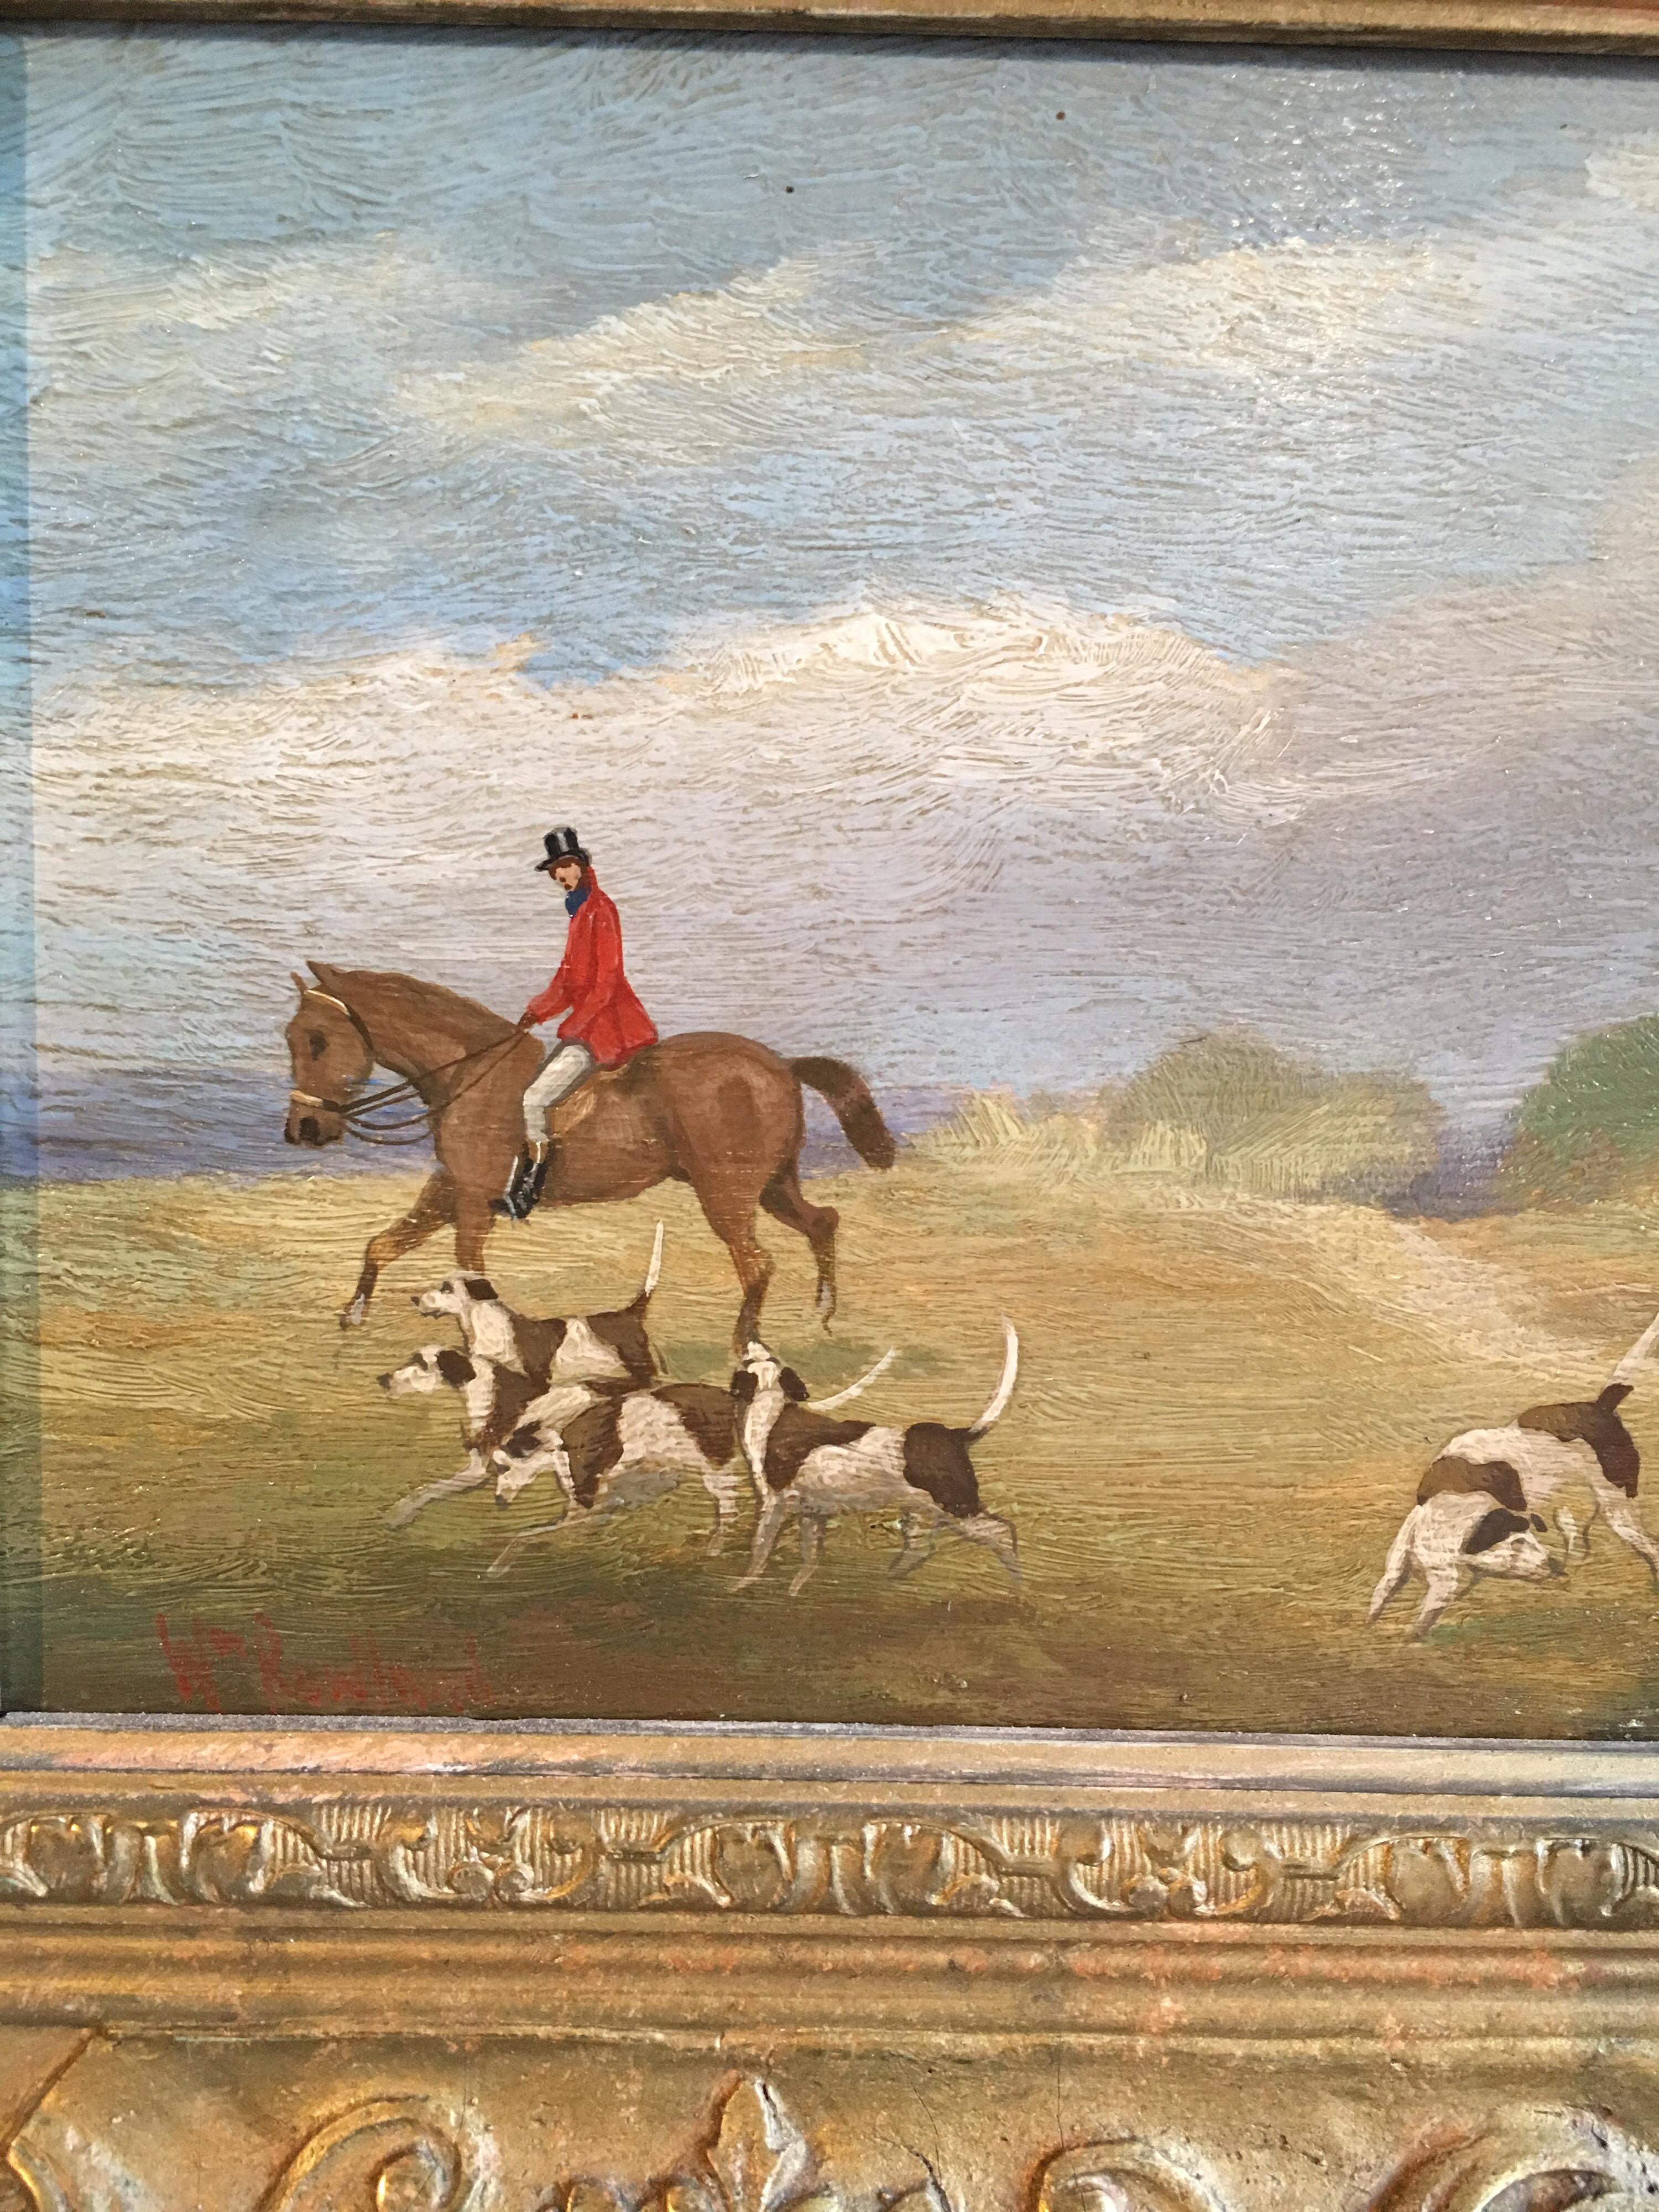 The Hunt
By artist William Rowland, British 19th century
Signed by the artist on the lower left hand corner
Oil painting on board, framed
Framed size: 11 x 17 inches
provenance: private UK collection

Fabulous scene of a spirited fox hunt, taking